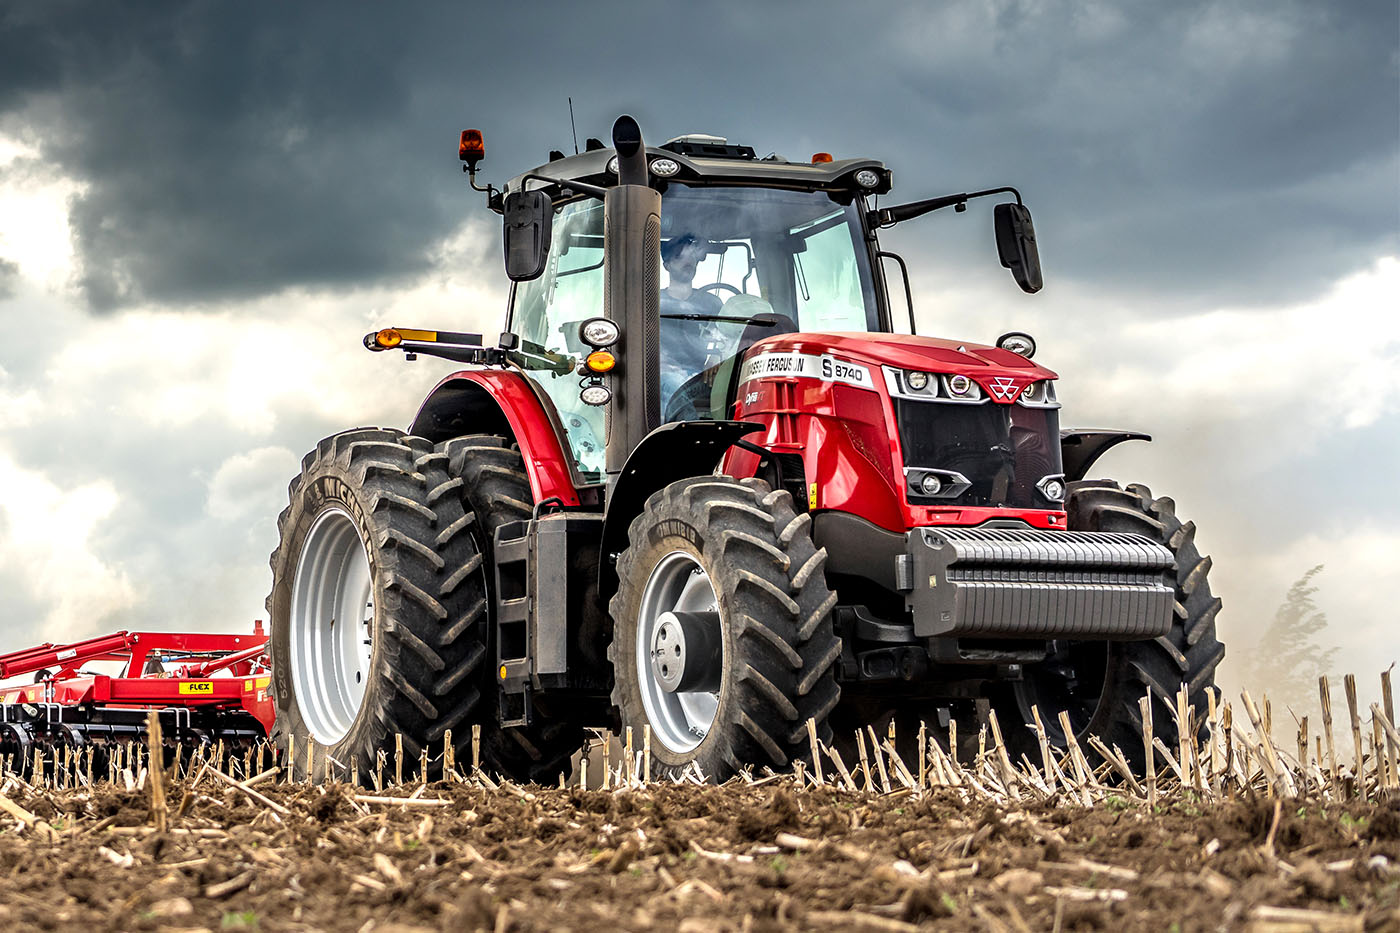 Discover the Latest Massey Ferguson Tractor Price List & Make the Best Investment